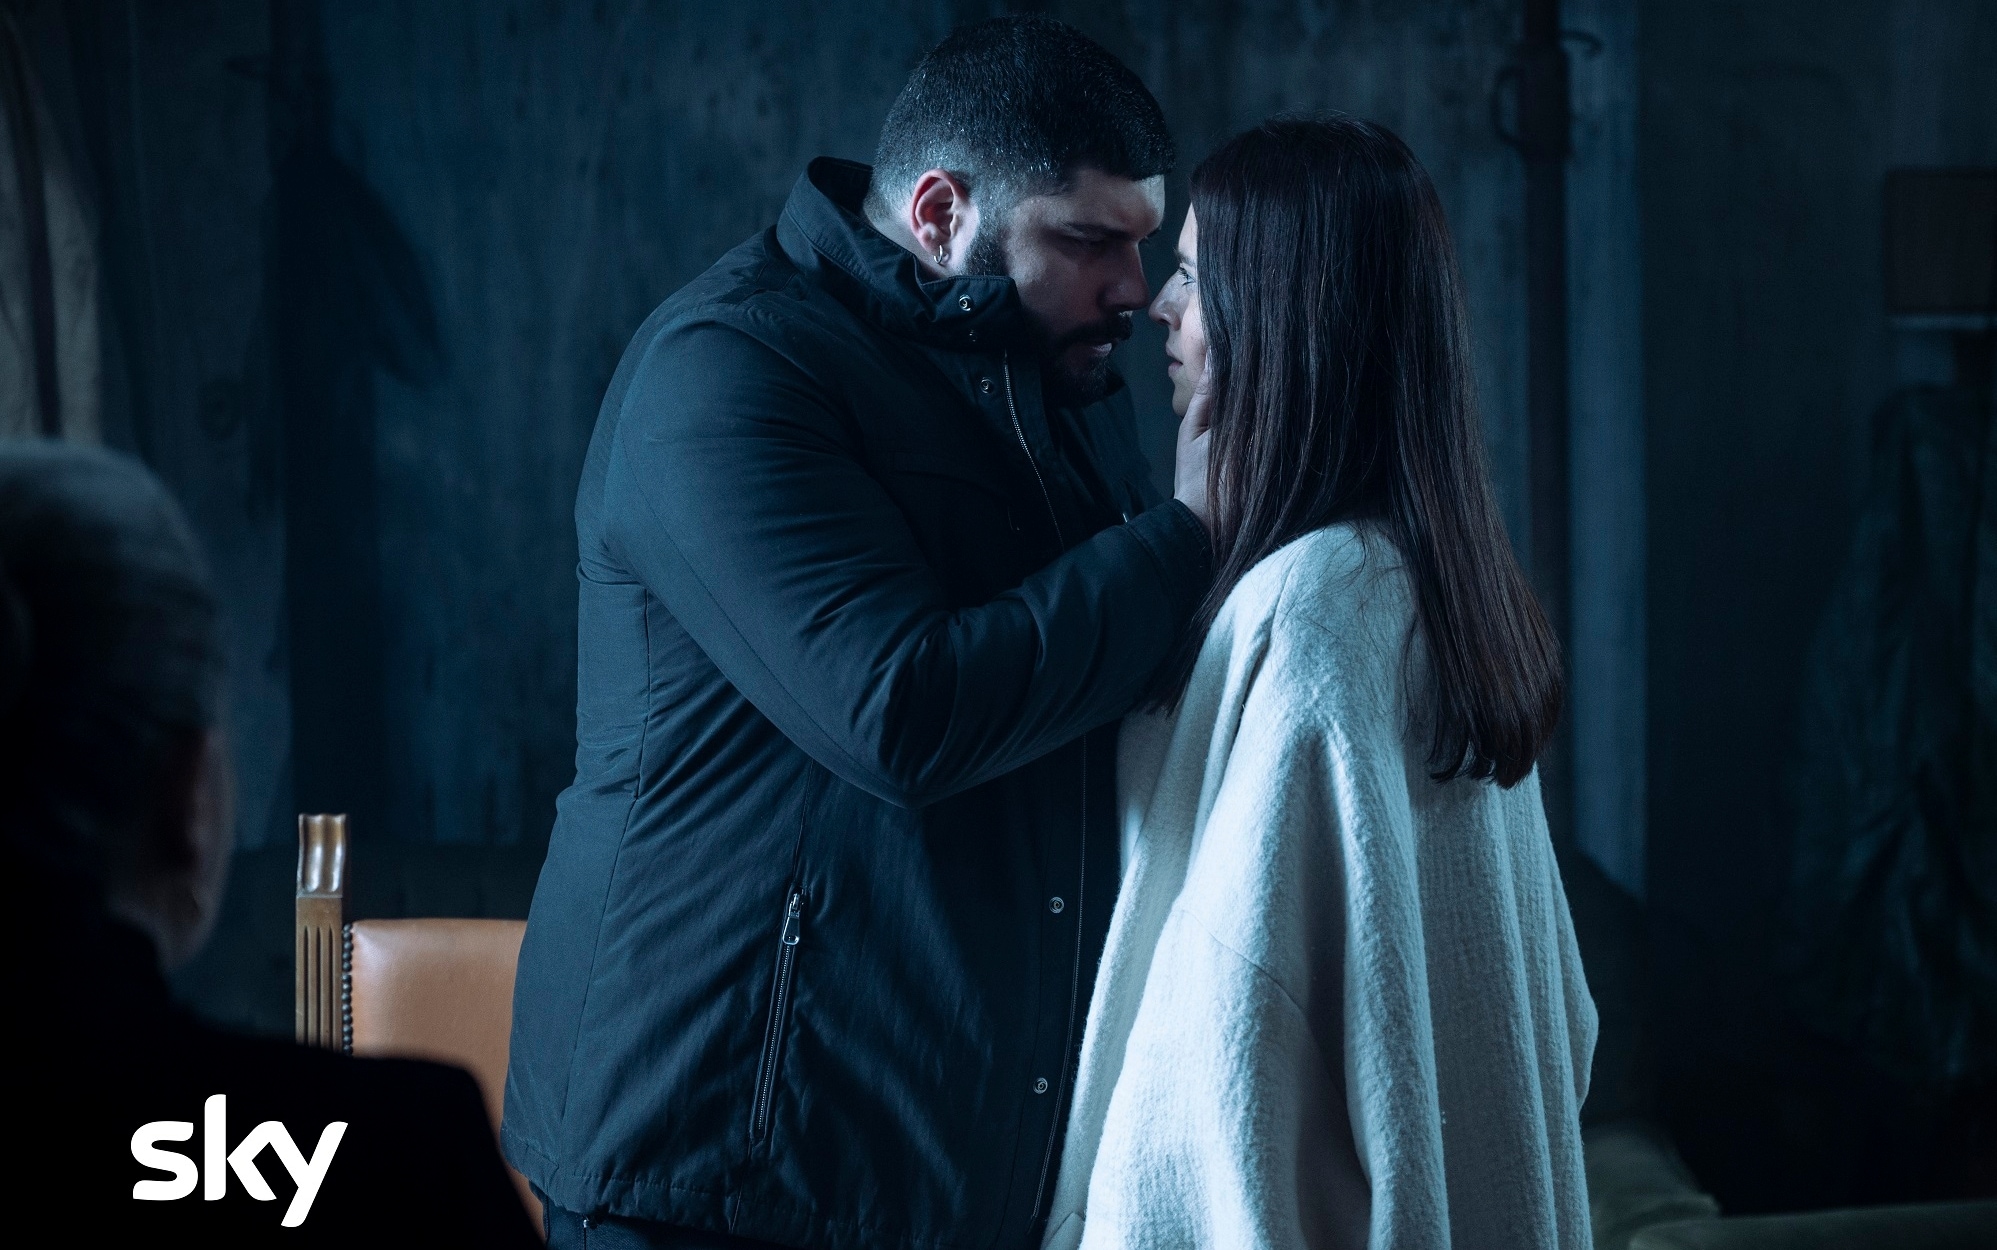 Gomorrah 5: plot and review of episode 10, the last chapter of the series